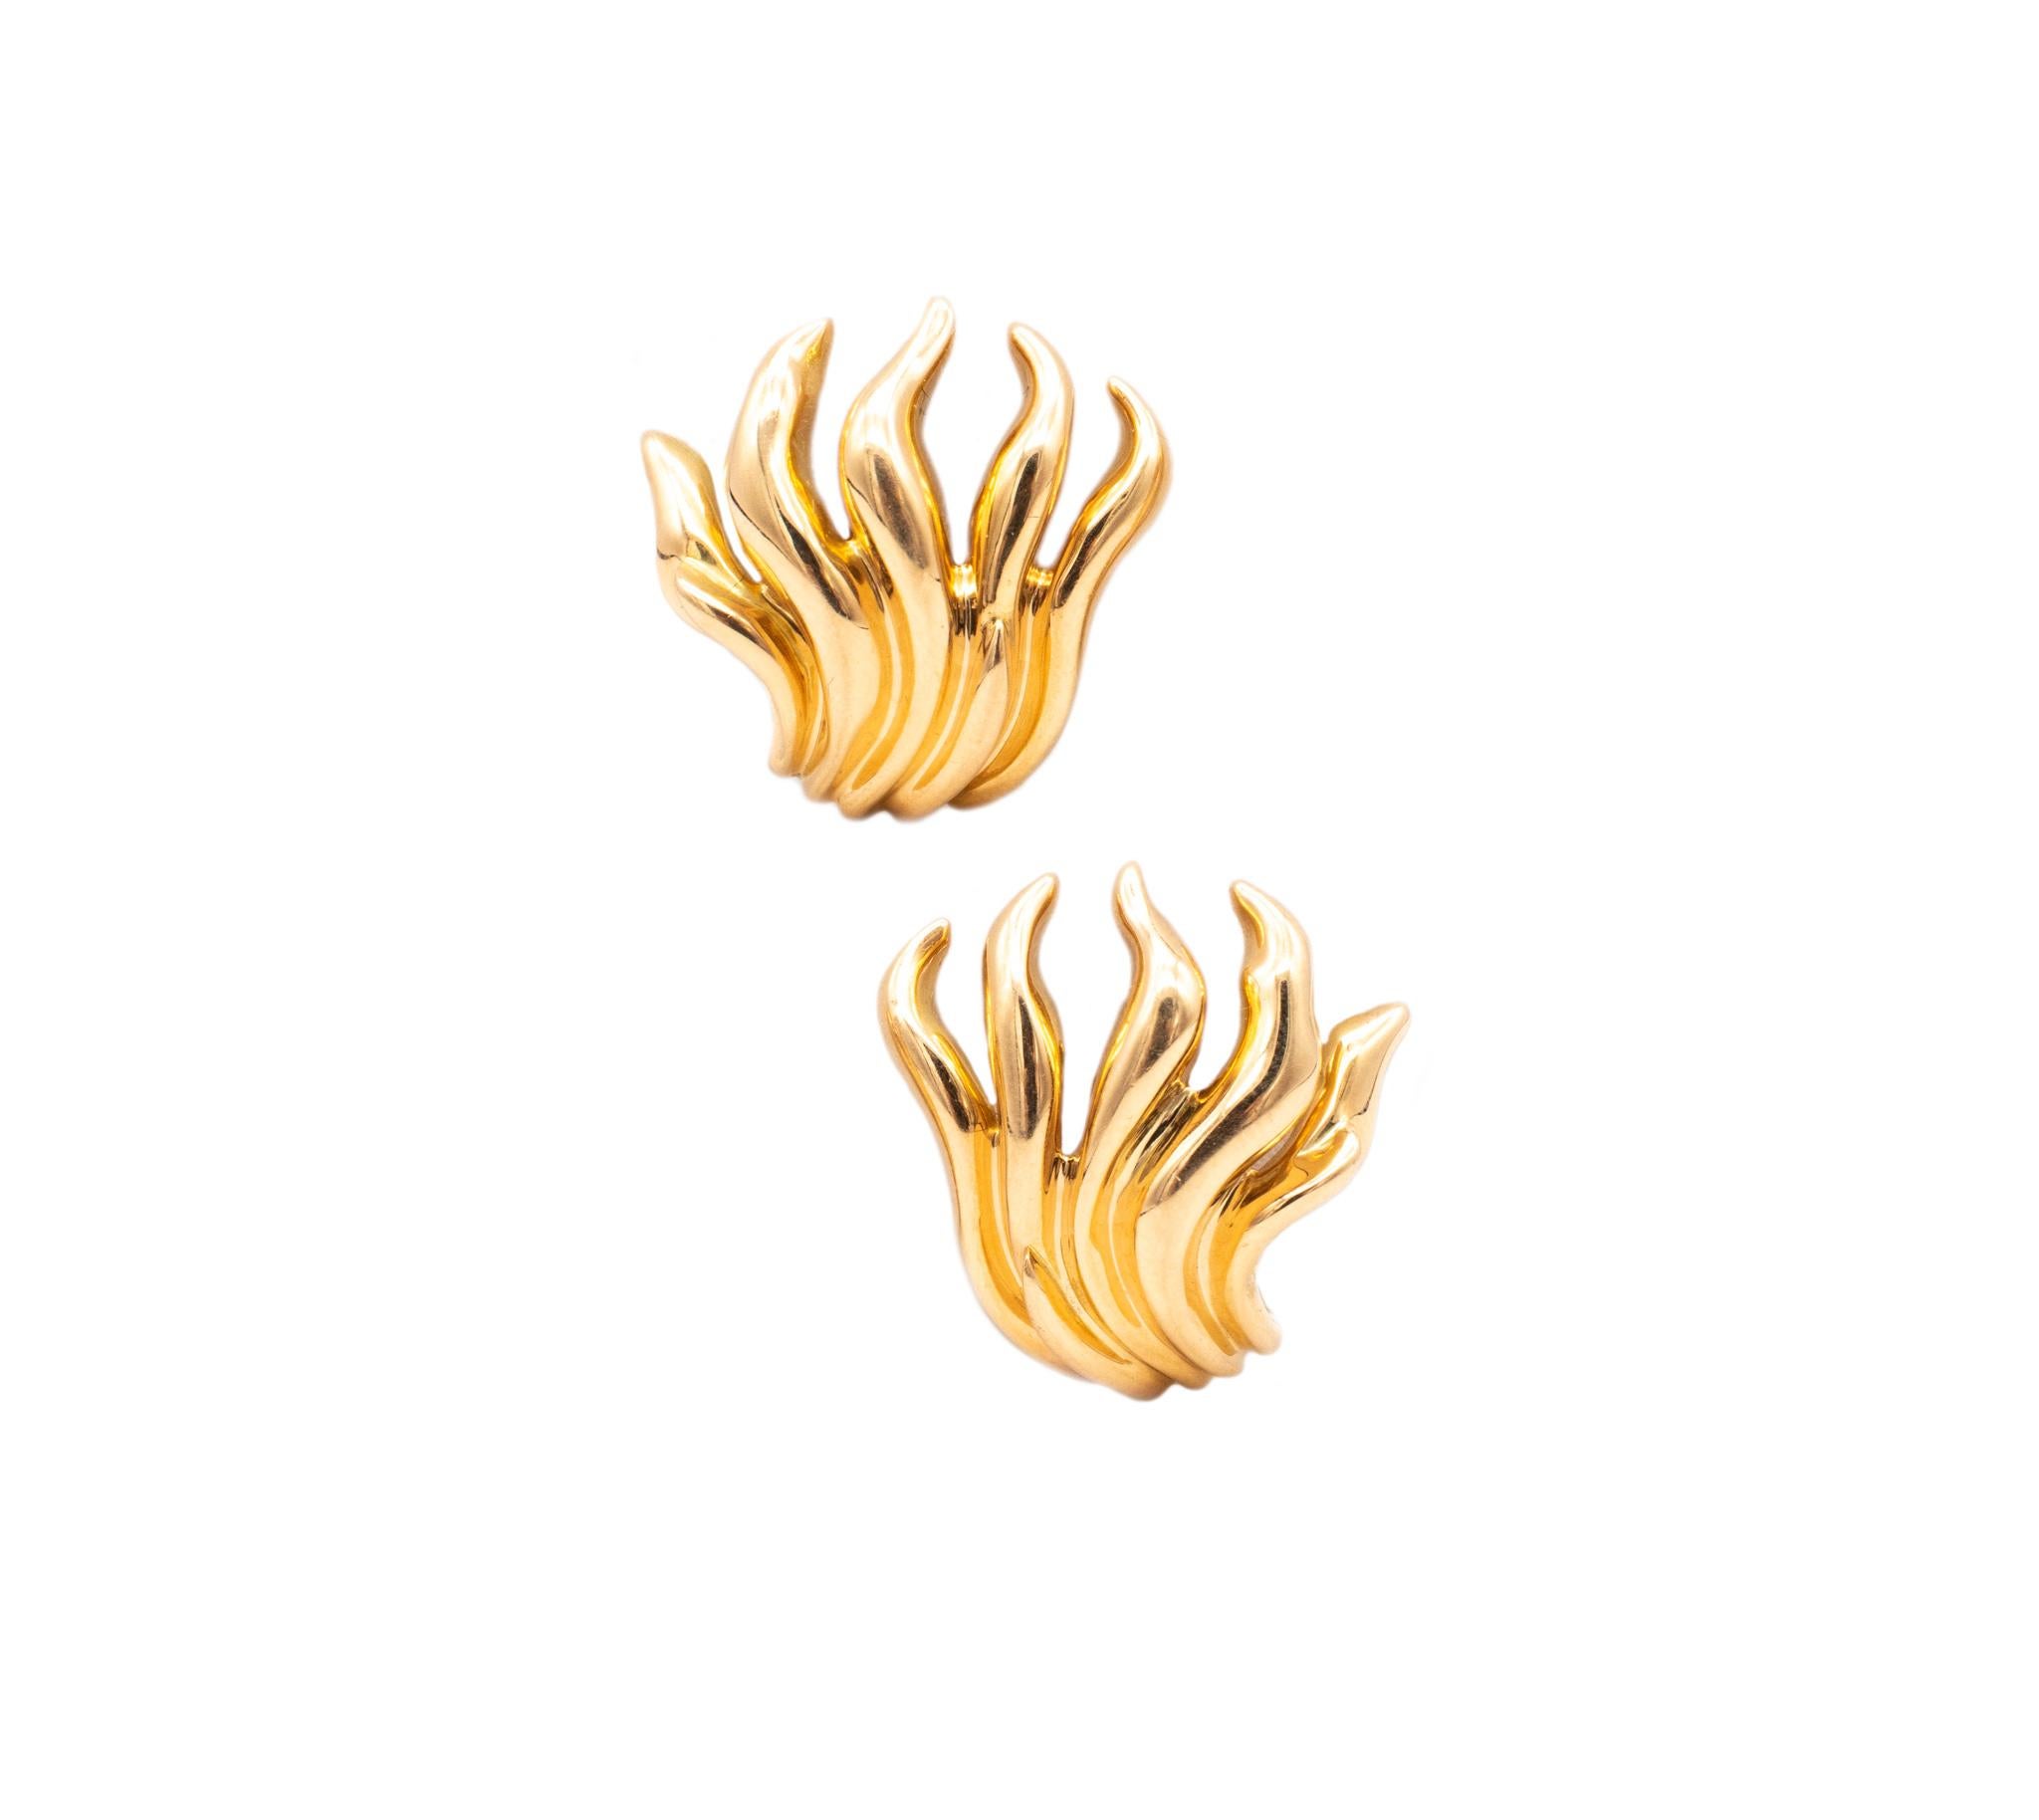 Modernist Verdura Milan Tendril Flames Sculptural Earrings in Solid 18Kt Yellow Gold For Sale